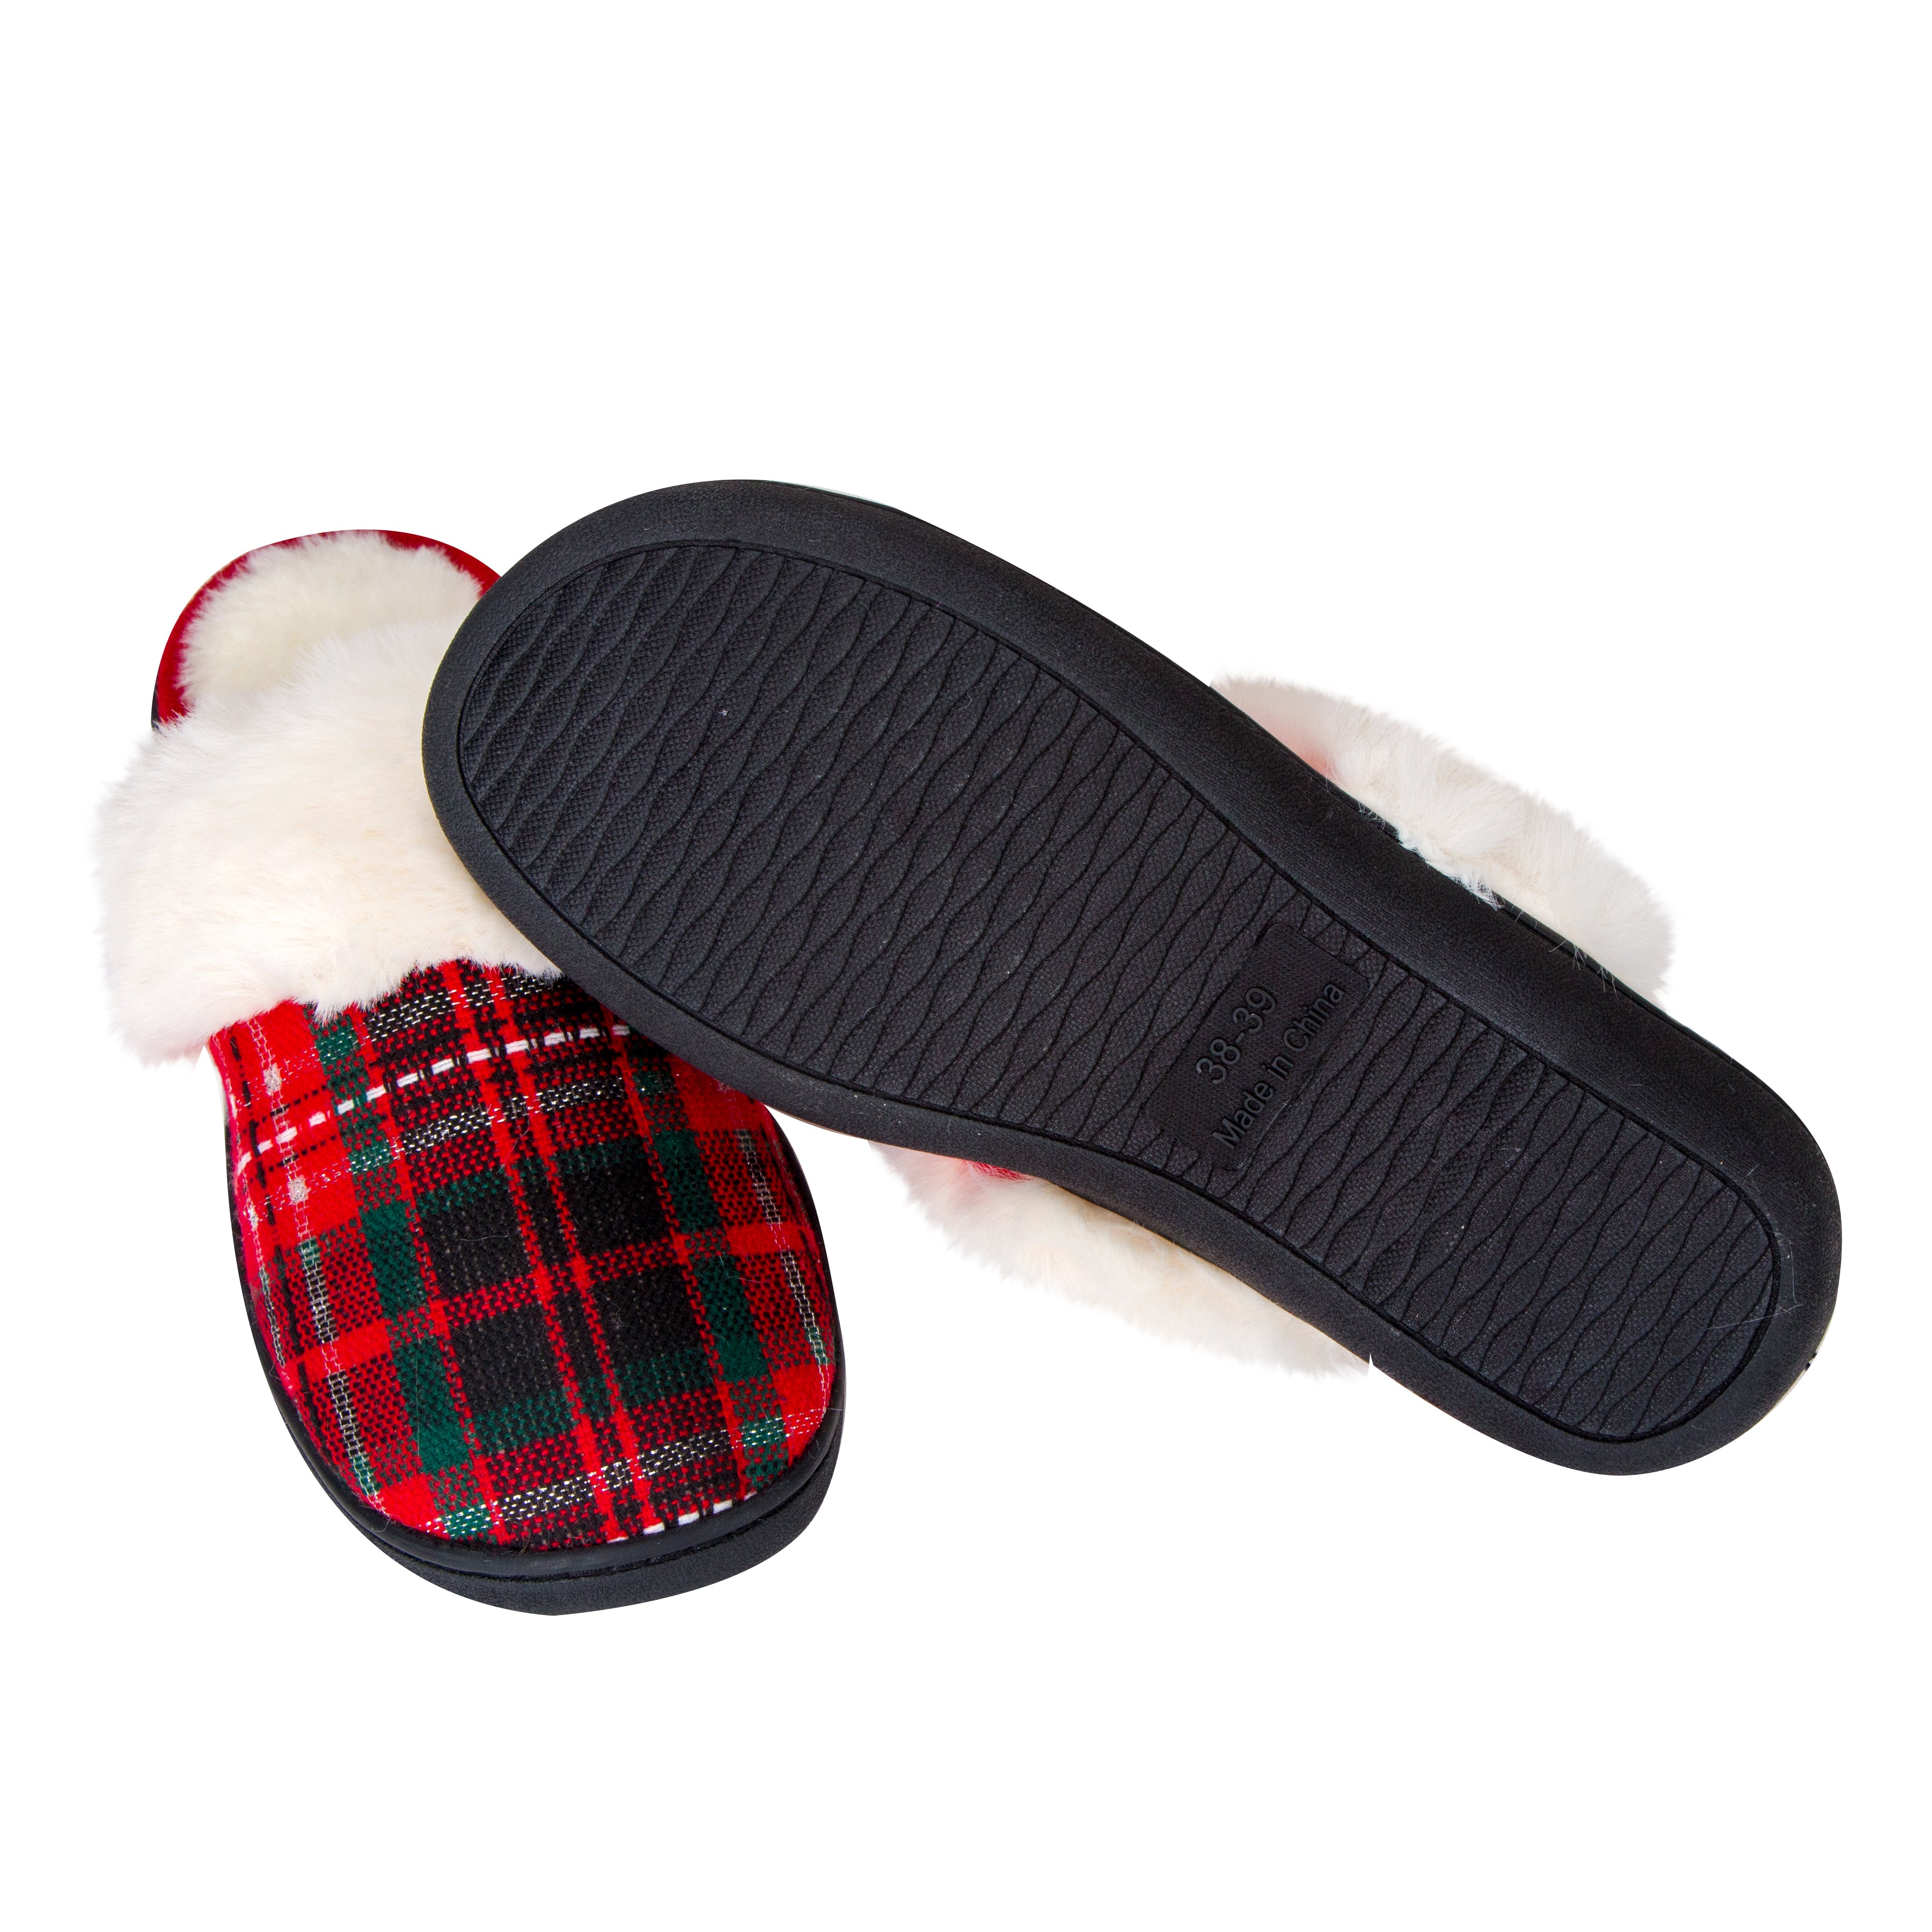 Furry Classical Plaid Slippers for Women Non-Slip Rubber Sole Memory Foam Fuzzy Plush Fluffy House Shoes Outdoor Indoor Christmas Xmas Gifts